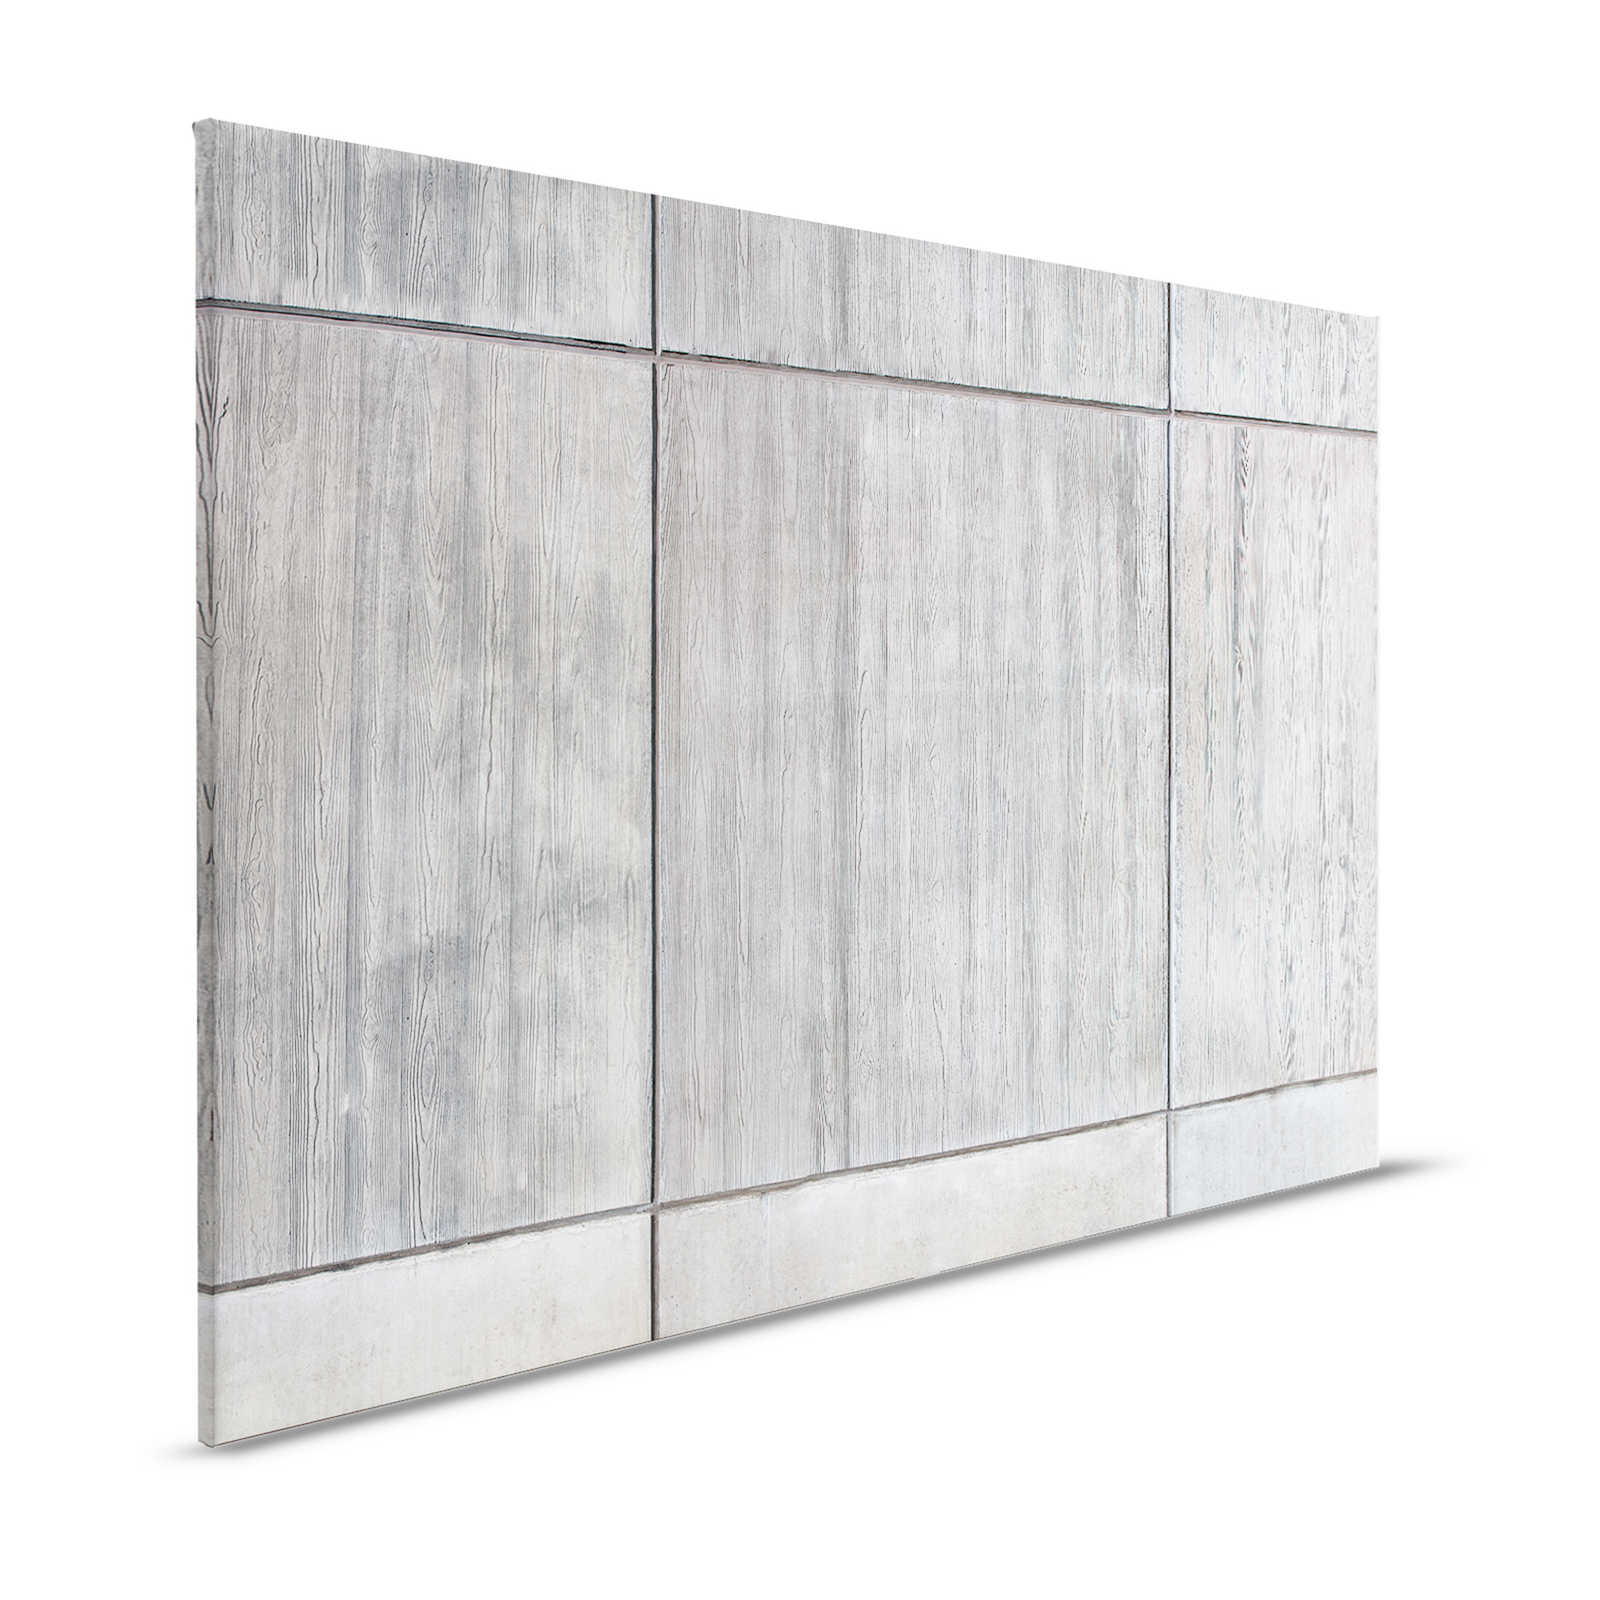 Concrete slab canvas picture with board formwork and wood grain - 1.20 m x 0.80 m
